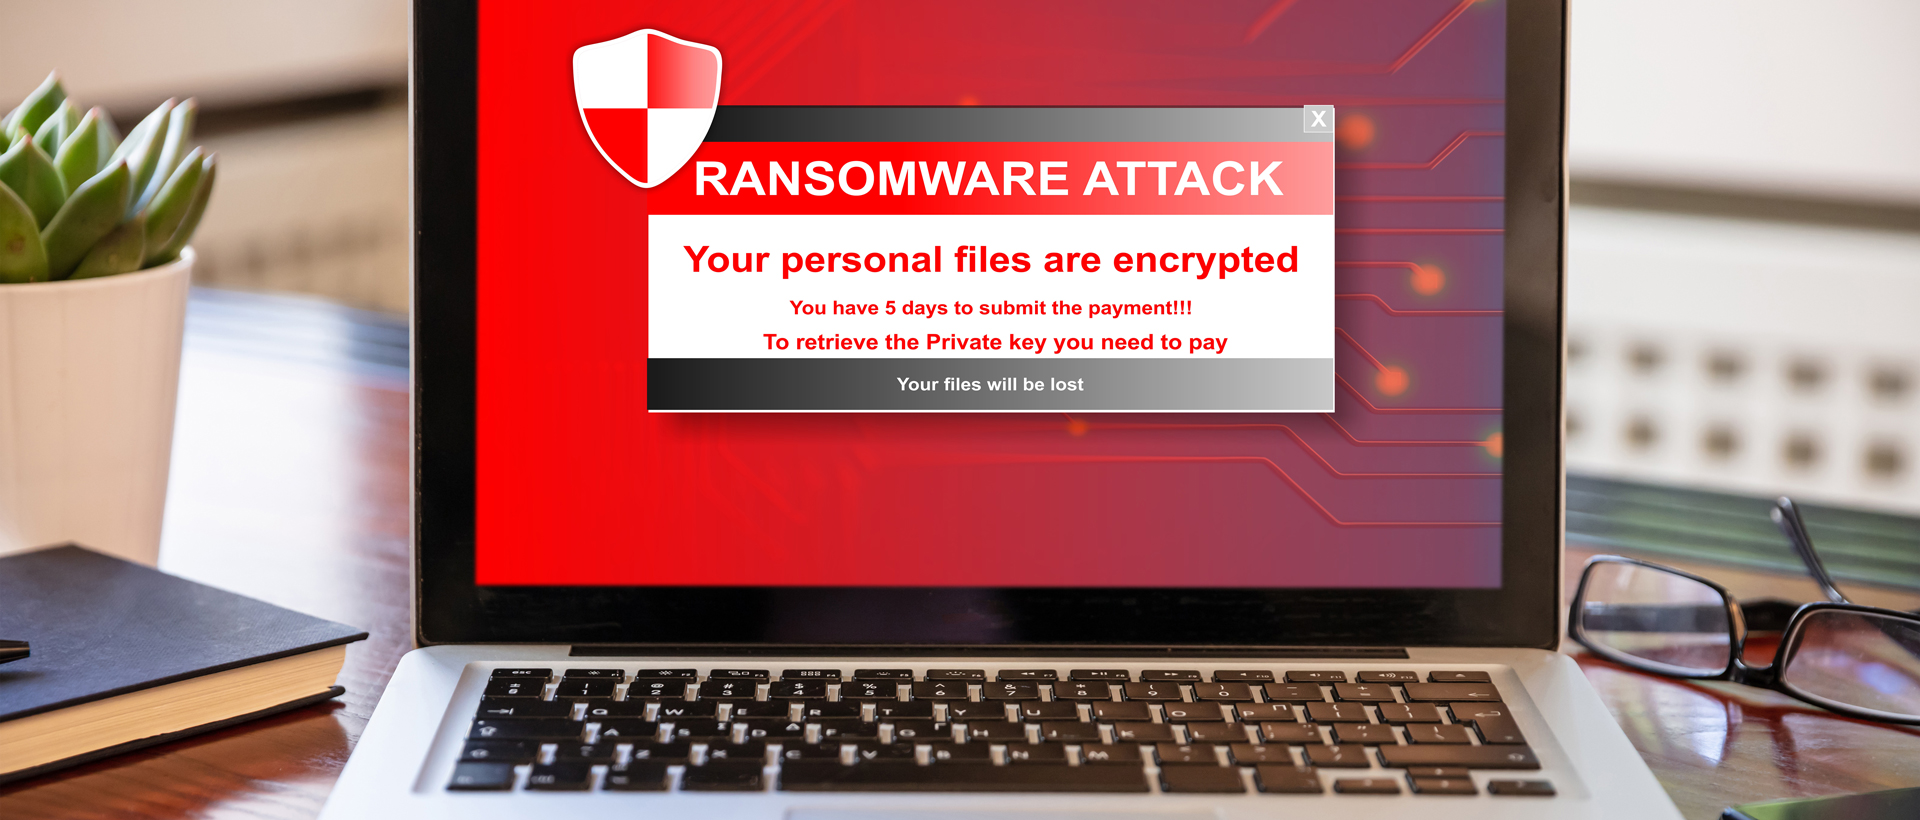 Ransomware-1920x820px